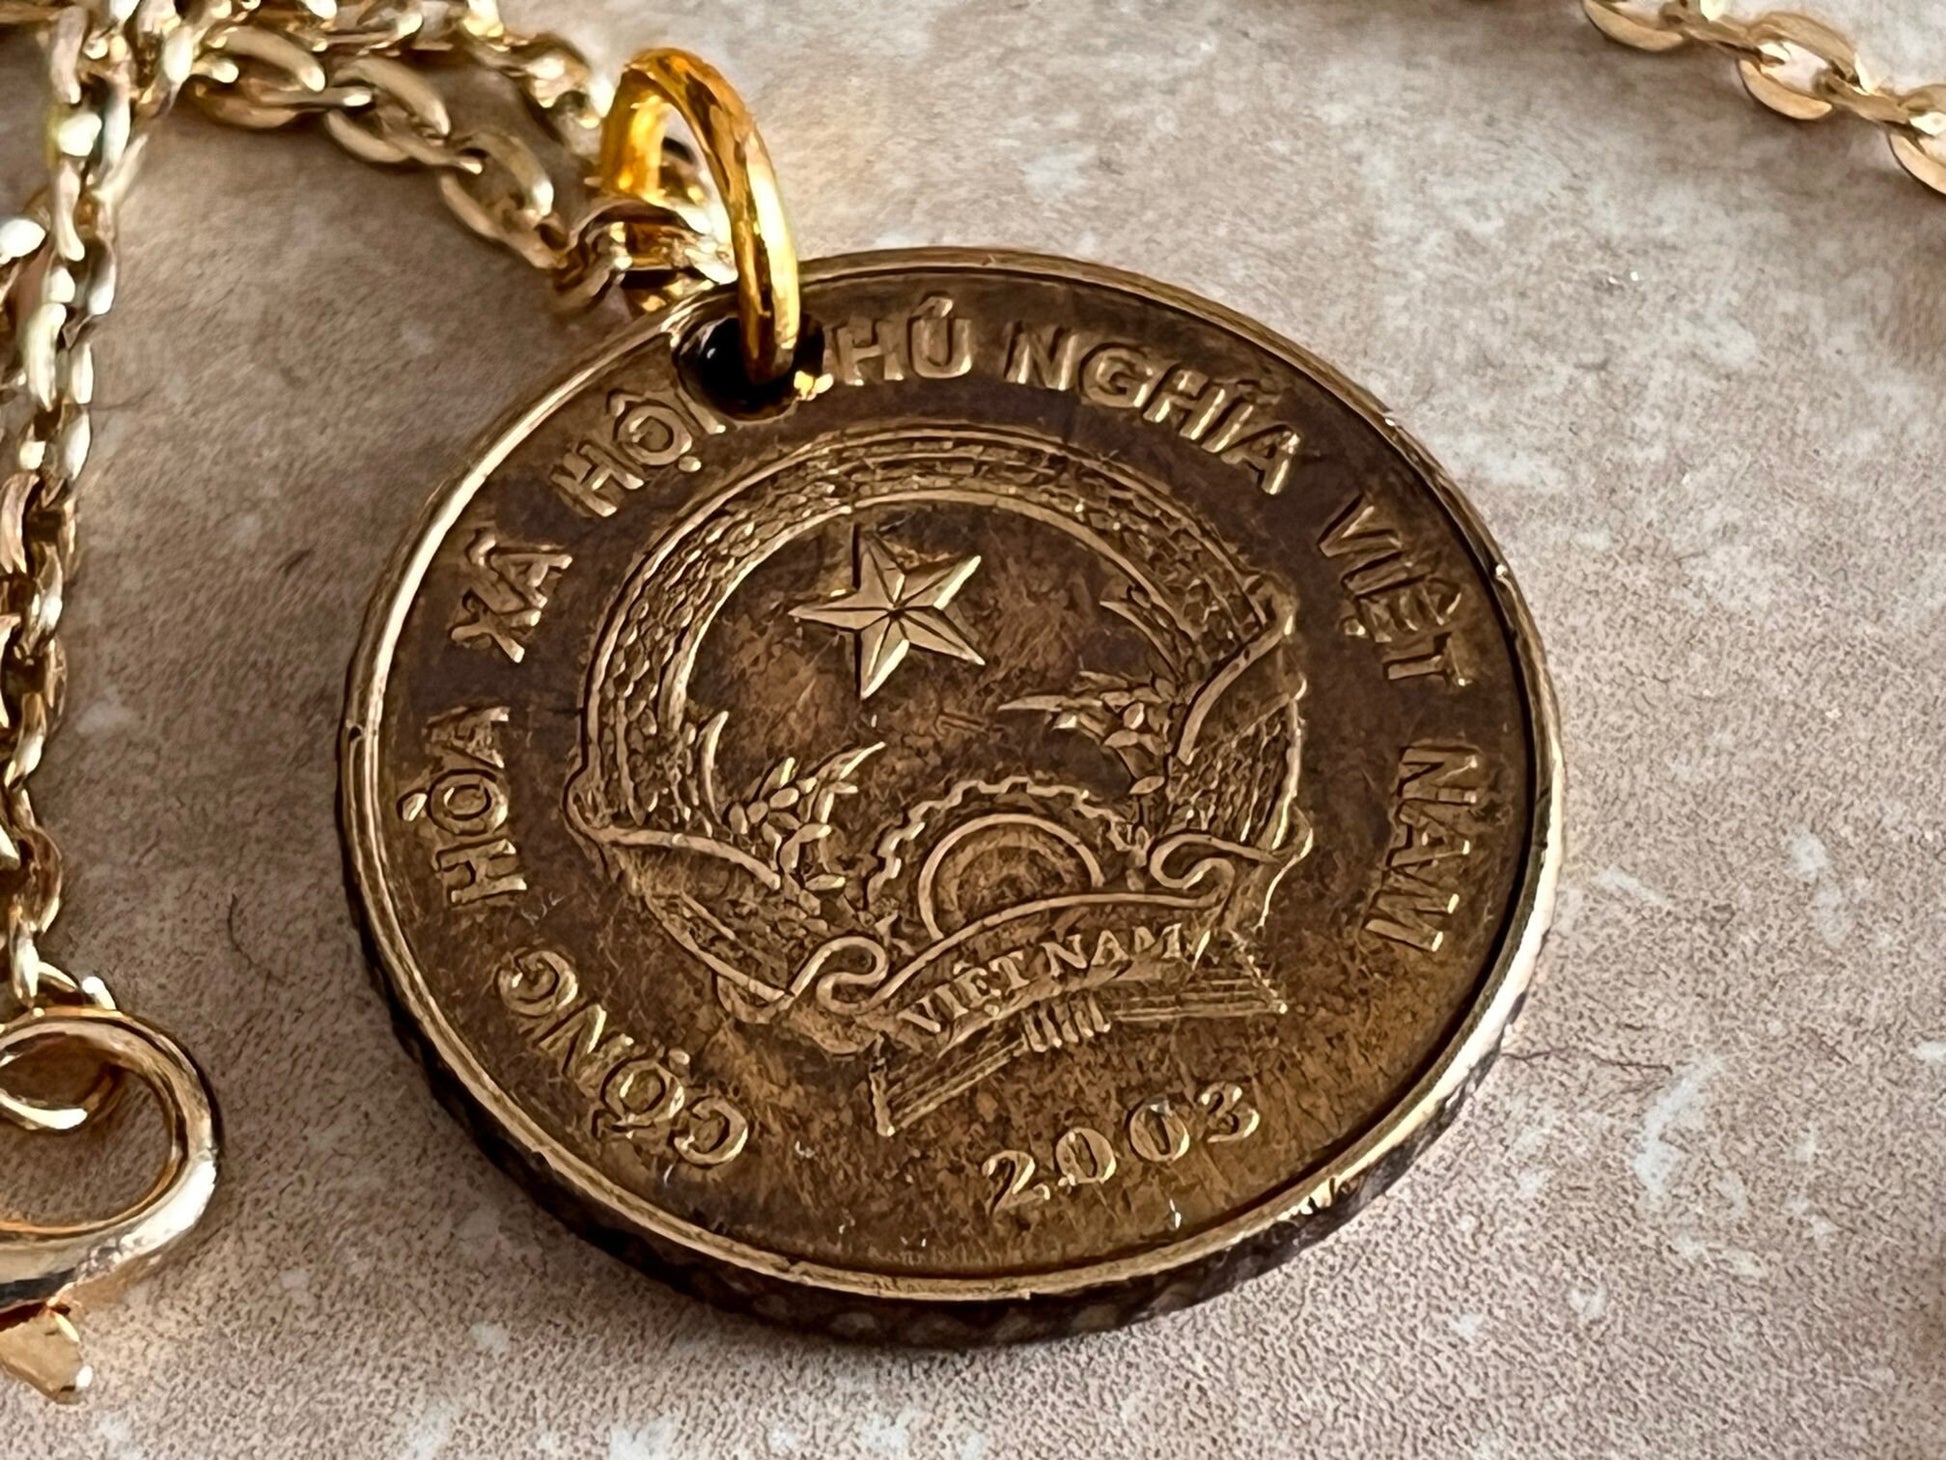 Vietnam Coin Necklace Vietnamese 5000 Dong Vintage Pendant Old Vintage Handmade Jewelry Gift Friend Charm For Him Her World Coin Collector